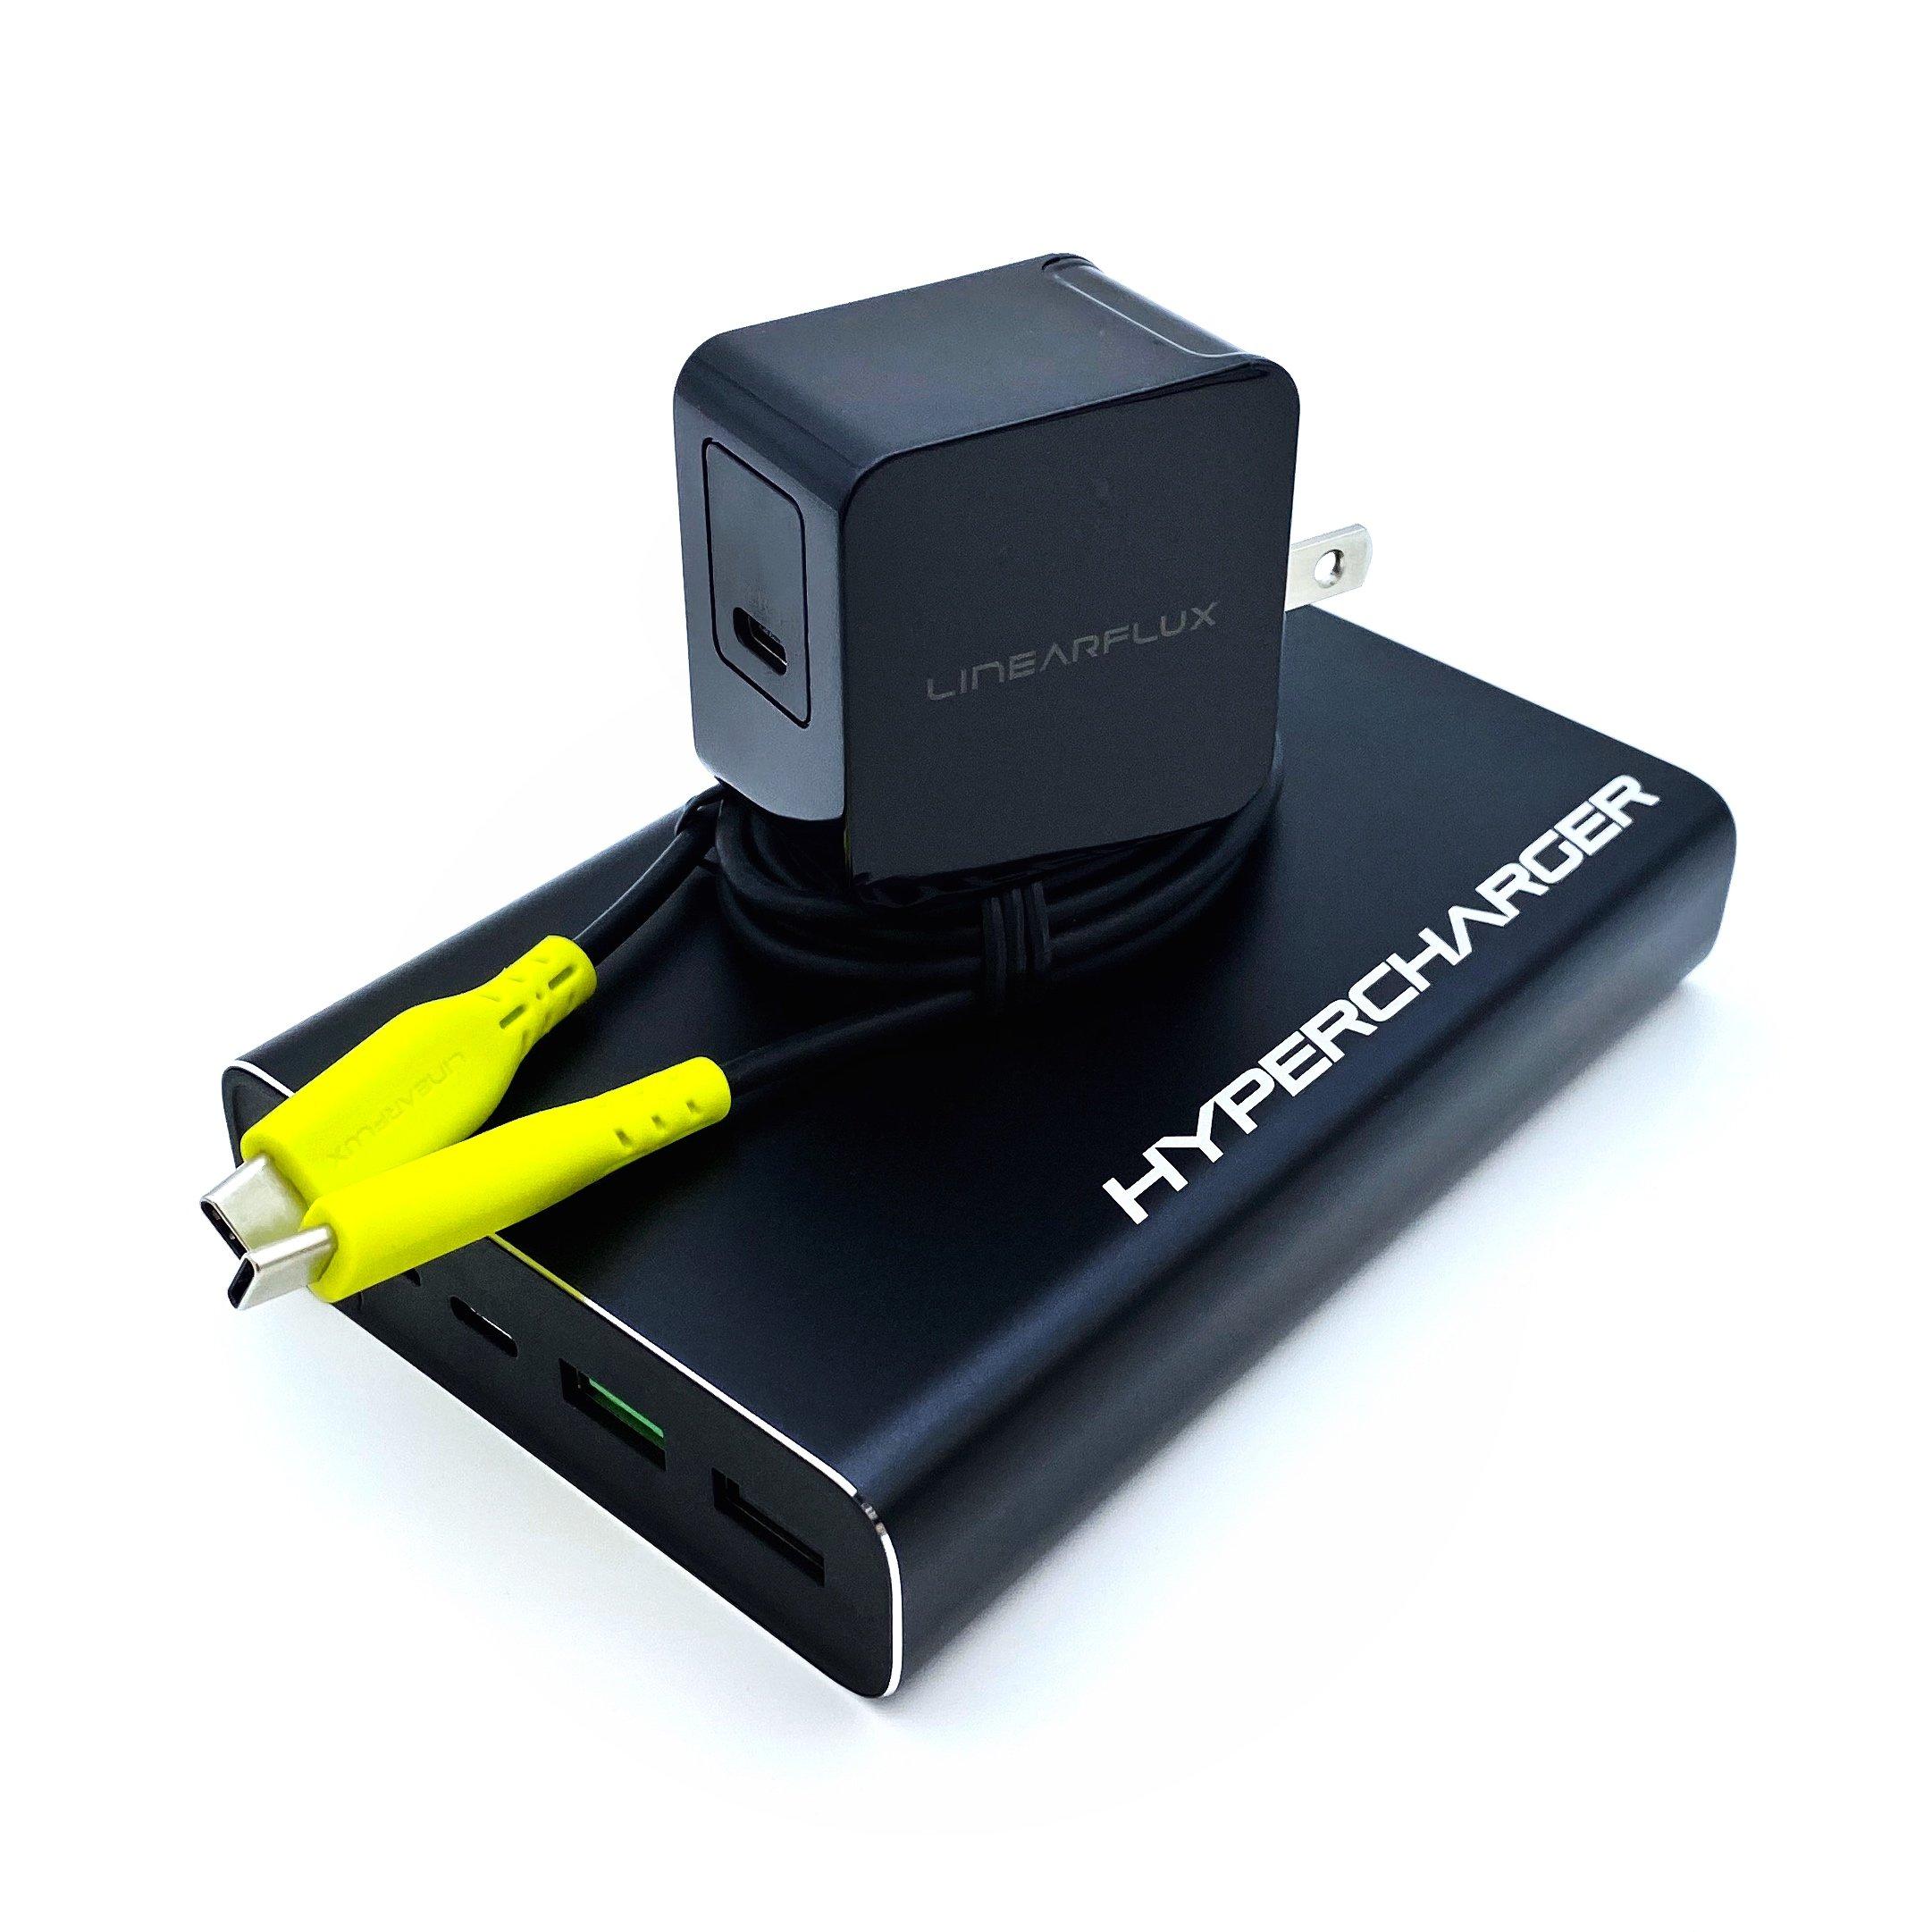 Linearflux Hypercharger Max USB-C Portable Charger (GameStop)